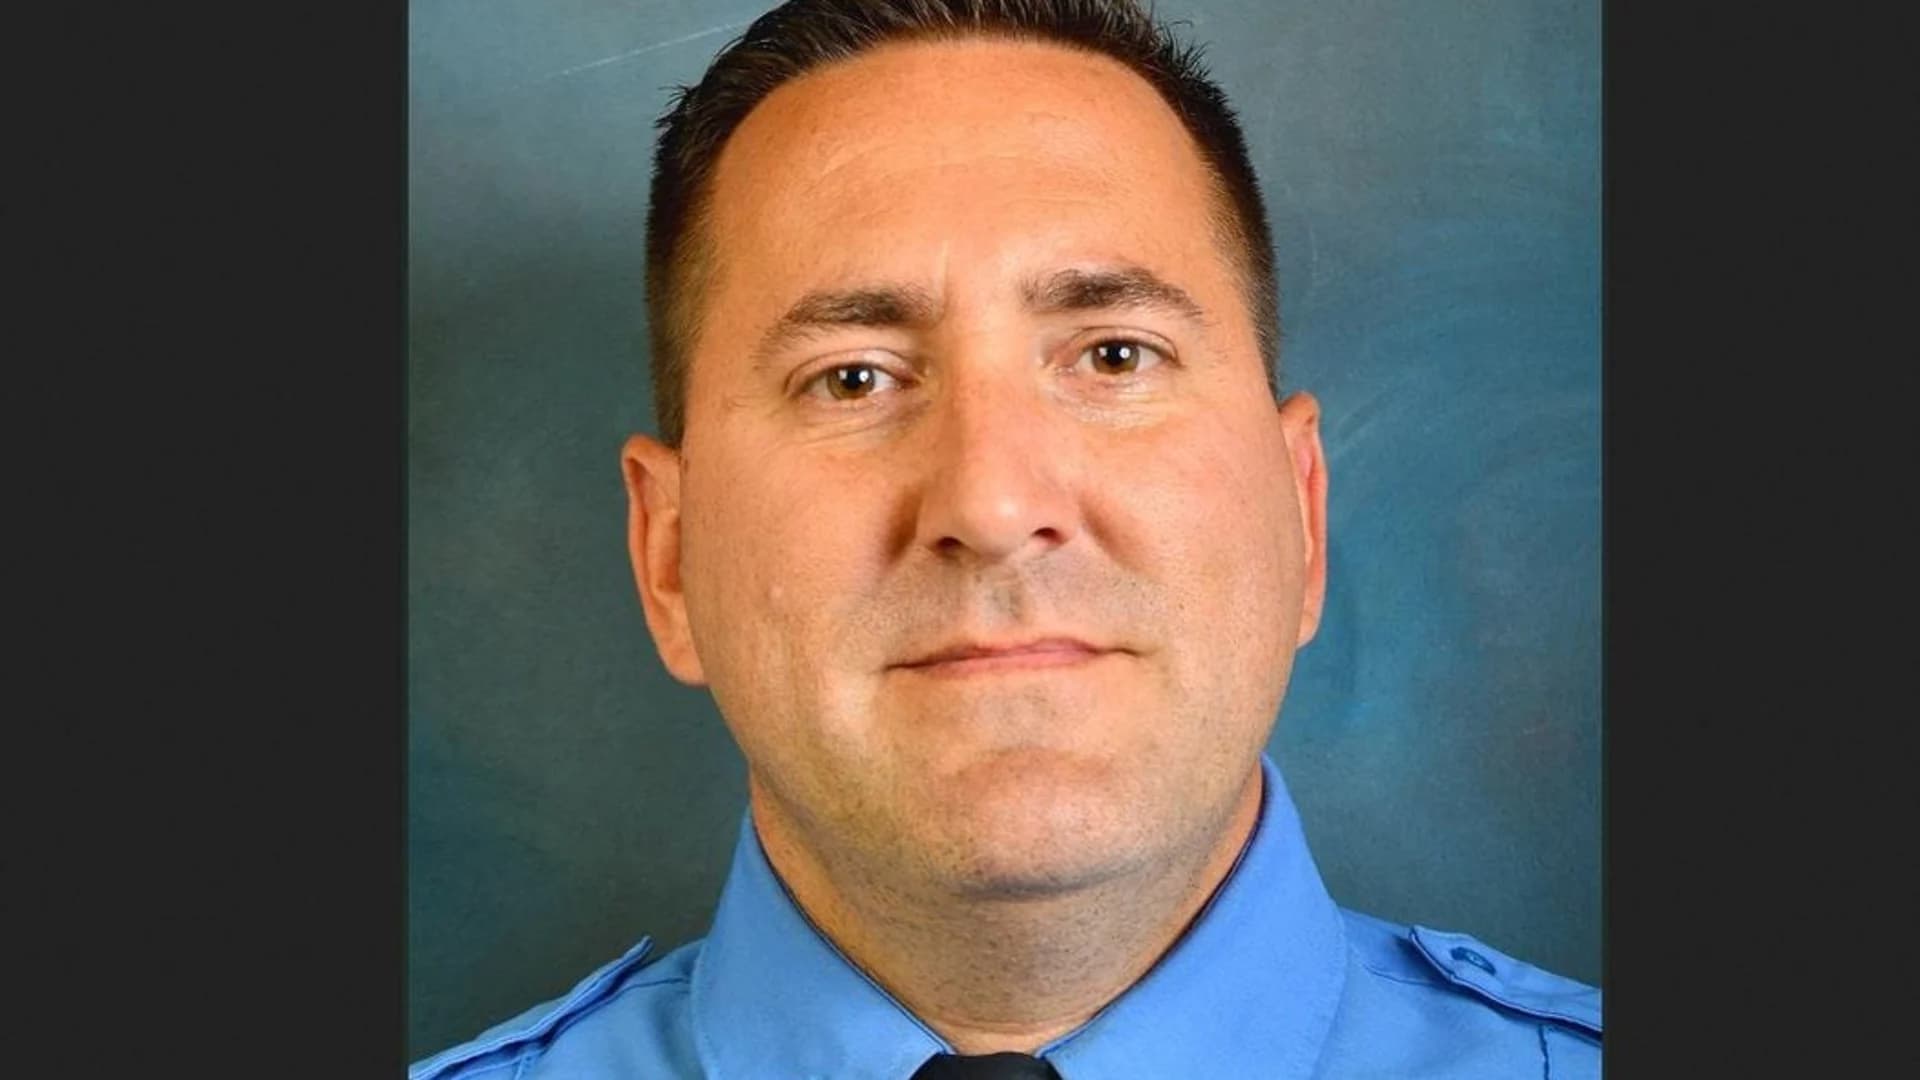 FDNY firefighter from Bethpage killed in line of duty